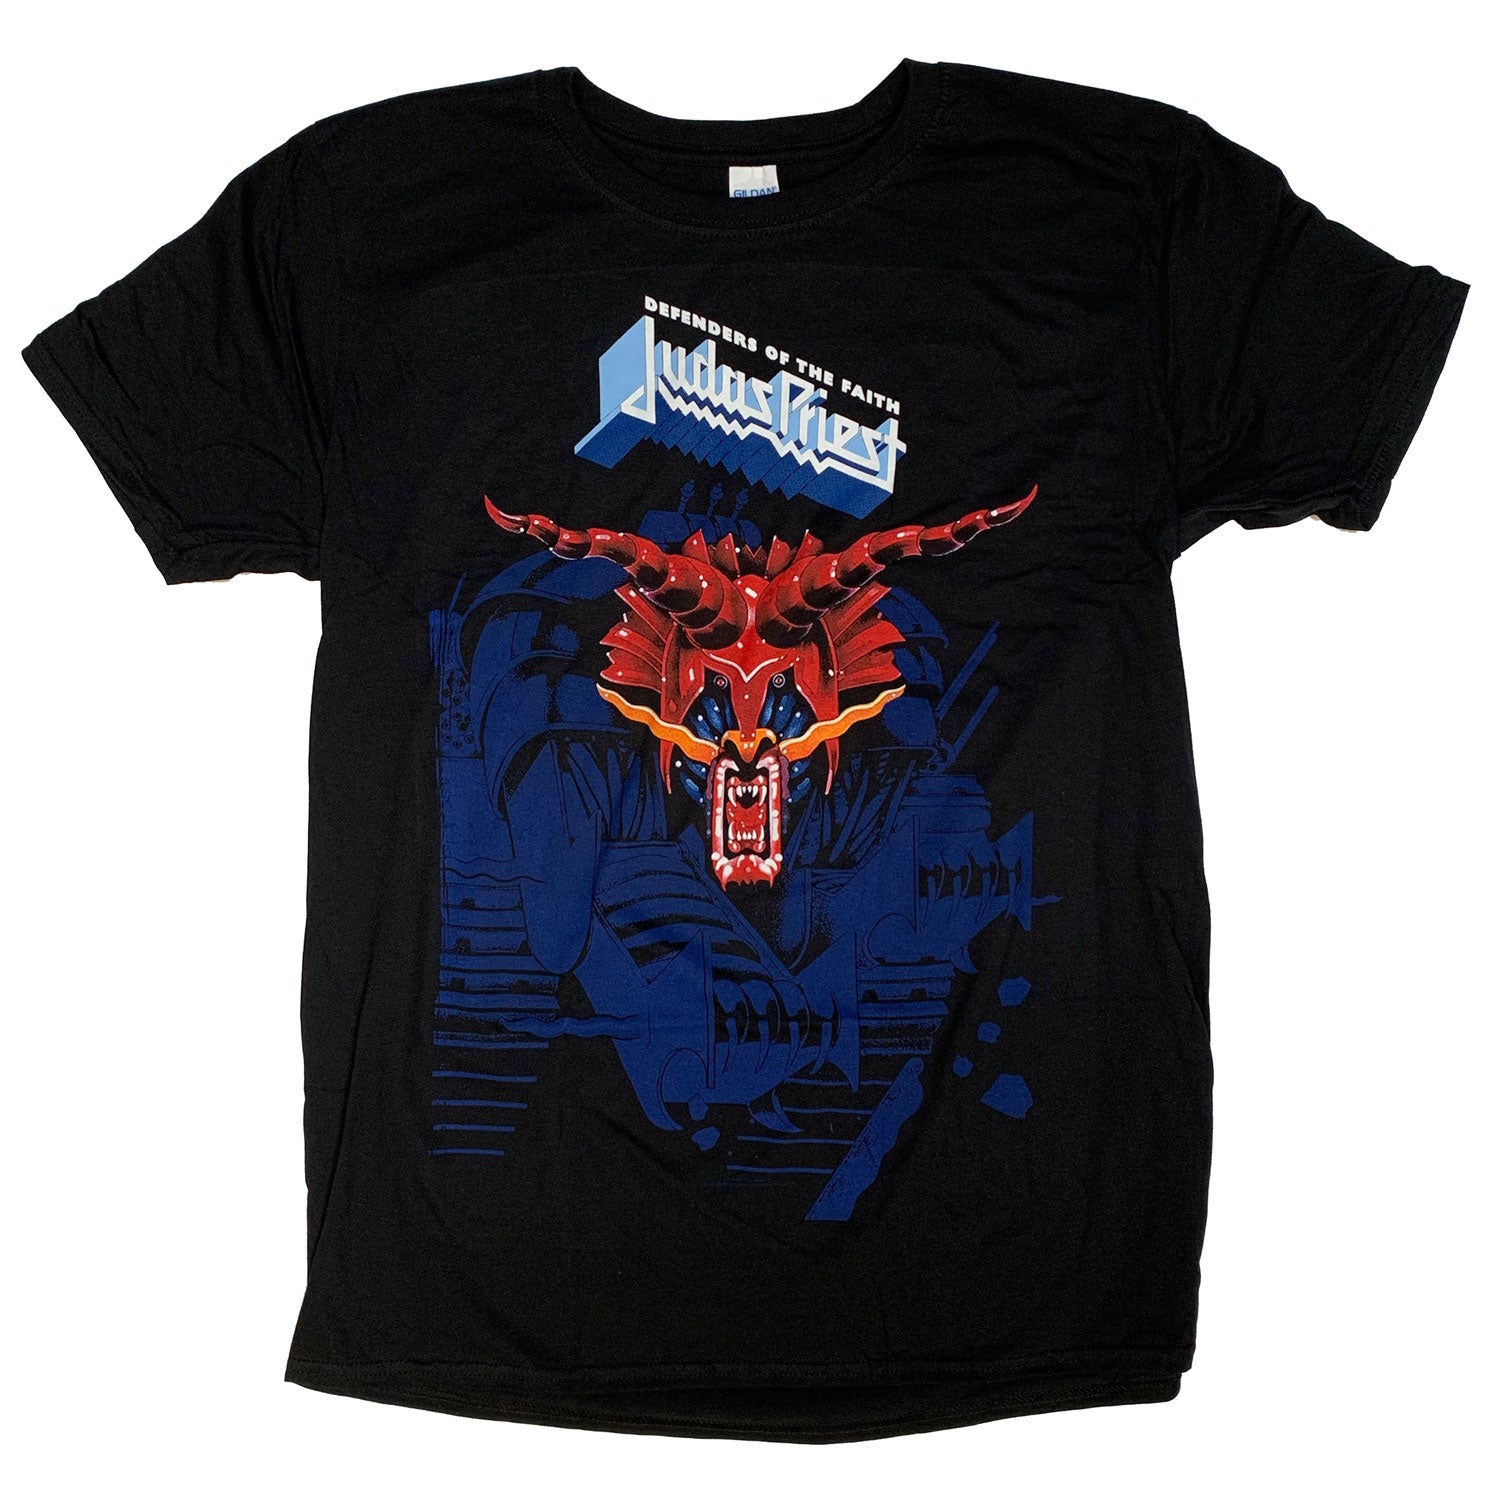 Judas Priest T Shirt - Defenders Of The Faith Cover 100% Official